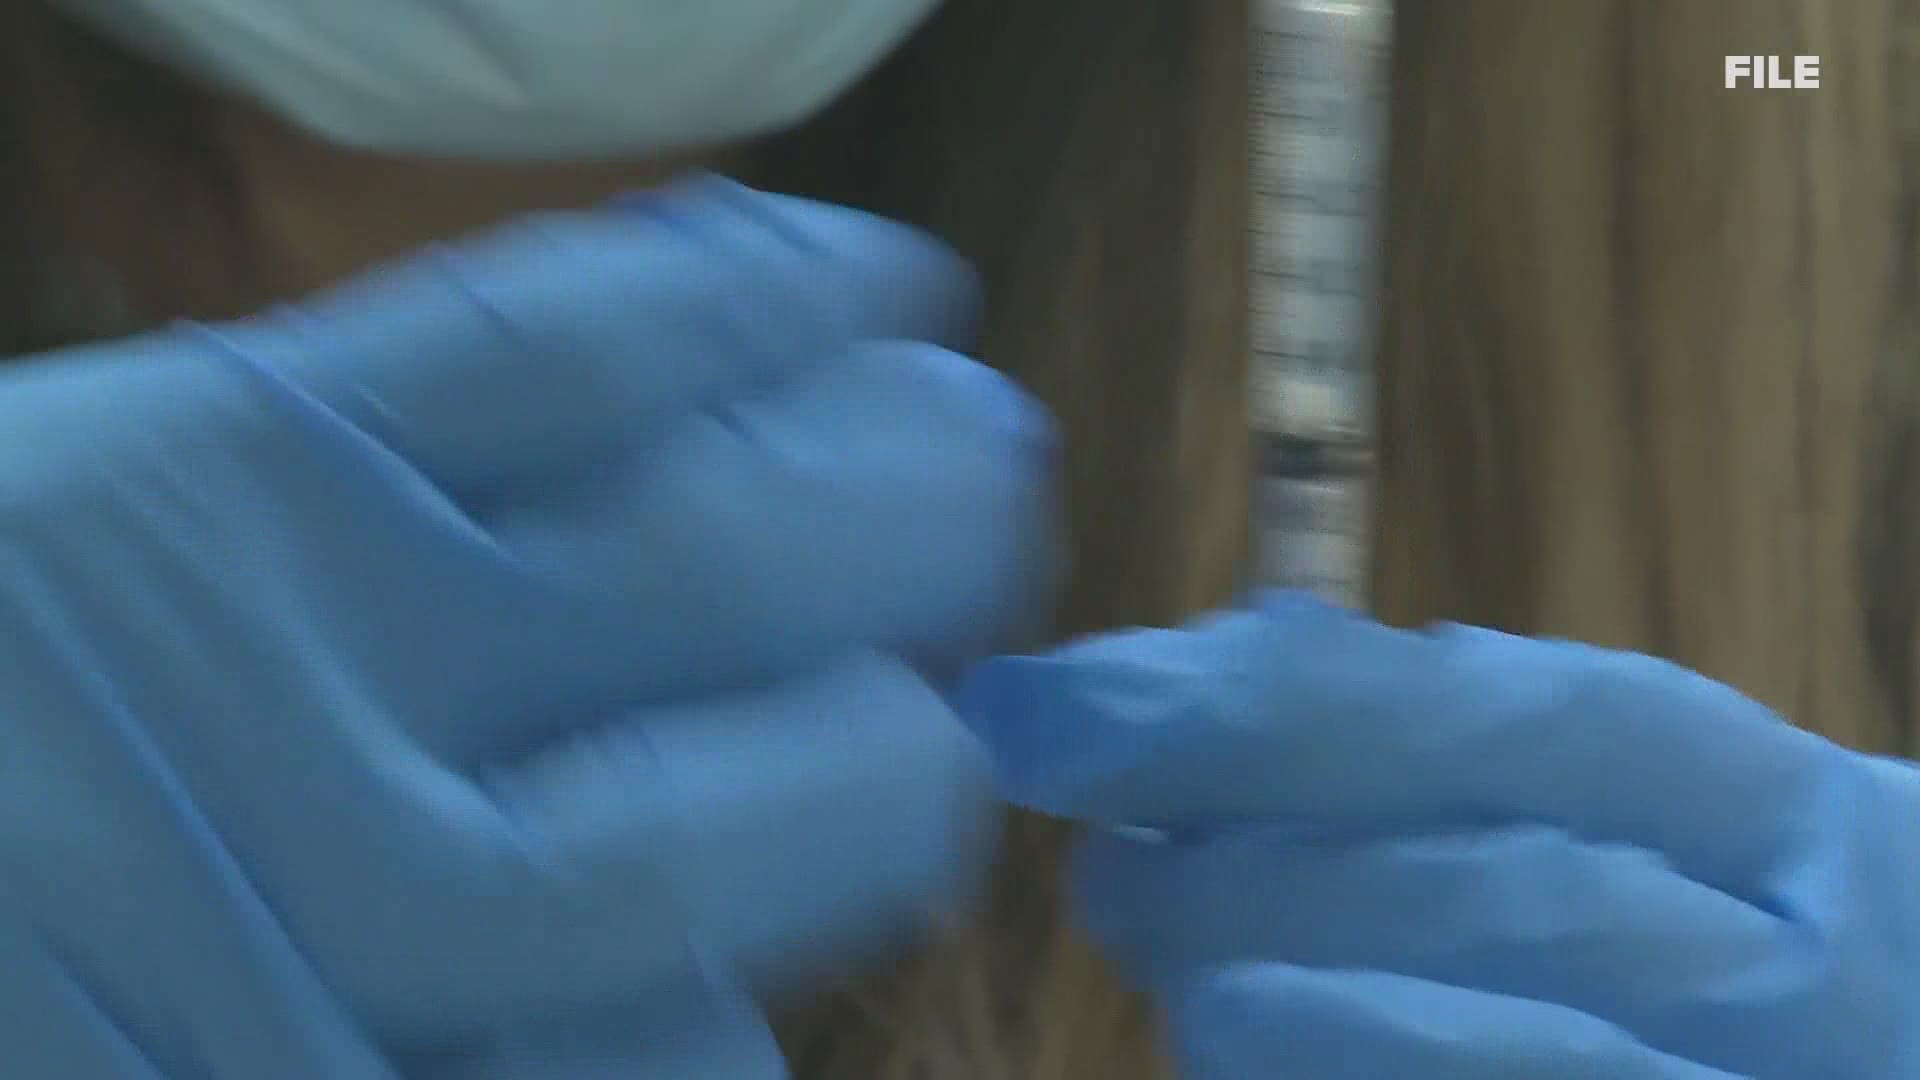 Vaccination clinics statewide are working to keep up as the race against time during the pandemic continues.